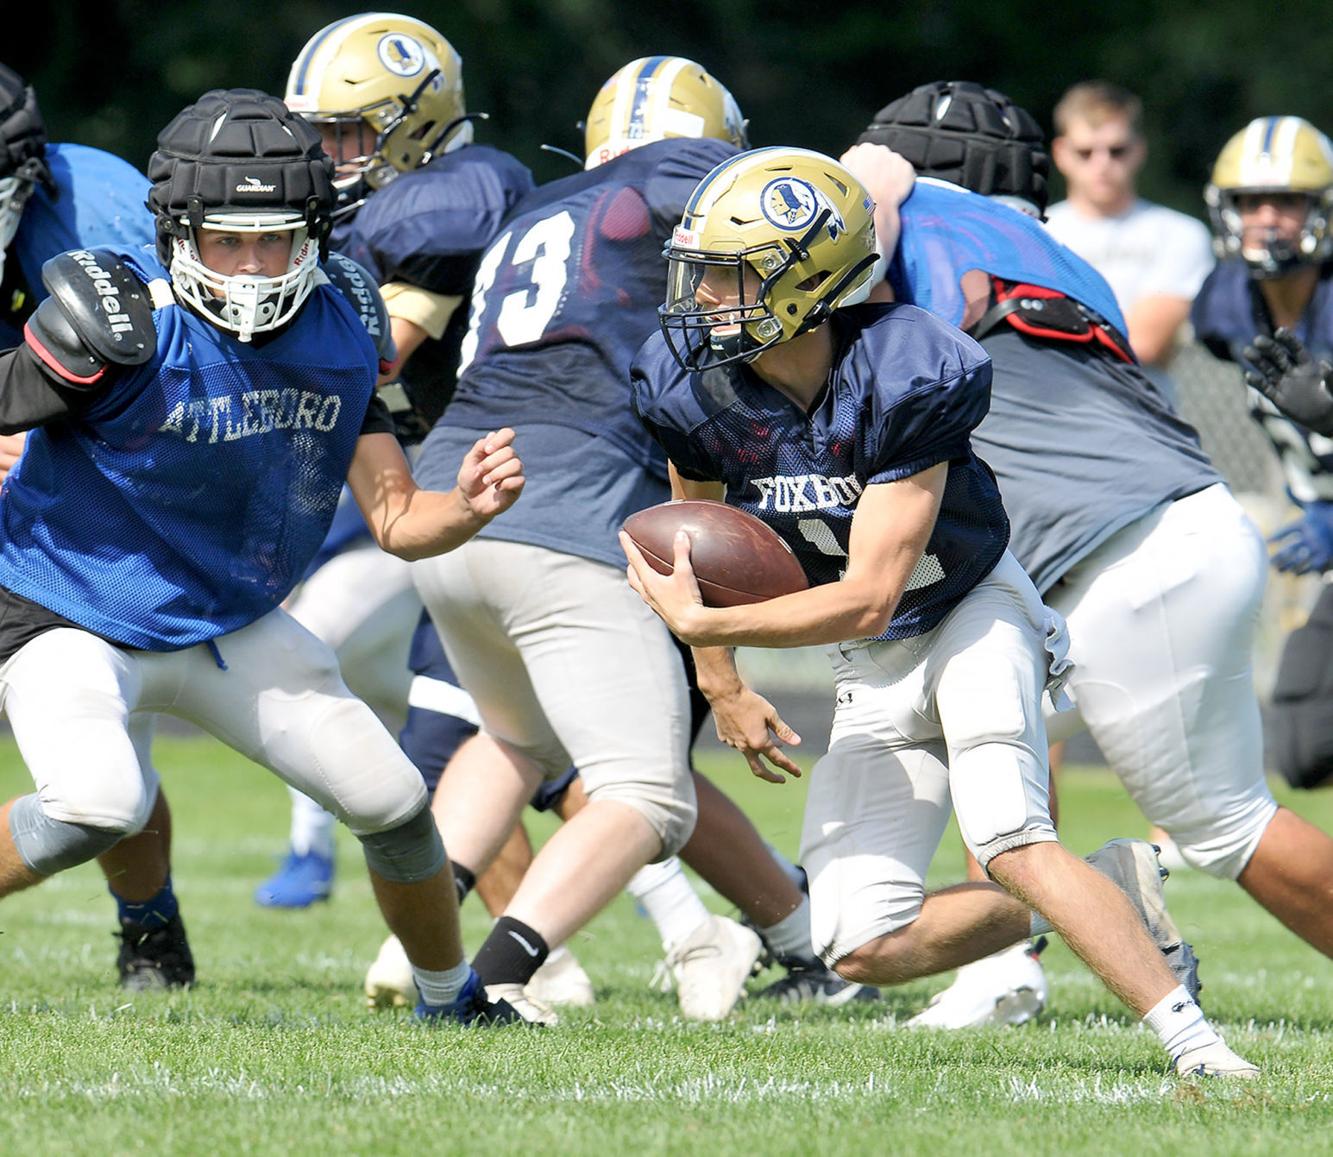 H.S. FOOTBALL PREVIEW Foxboro looks to pick up where it left off